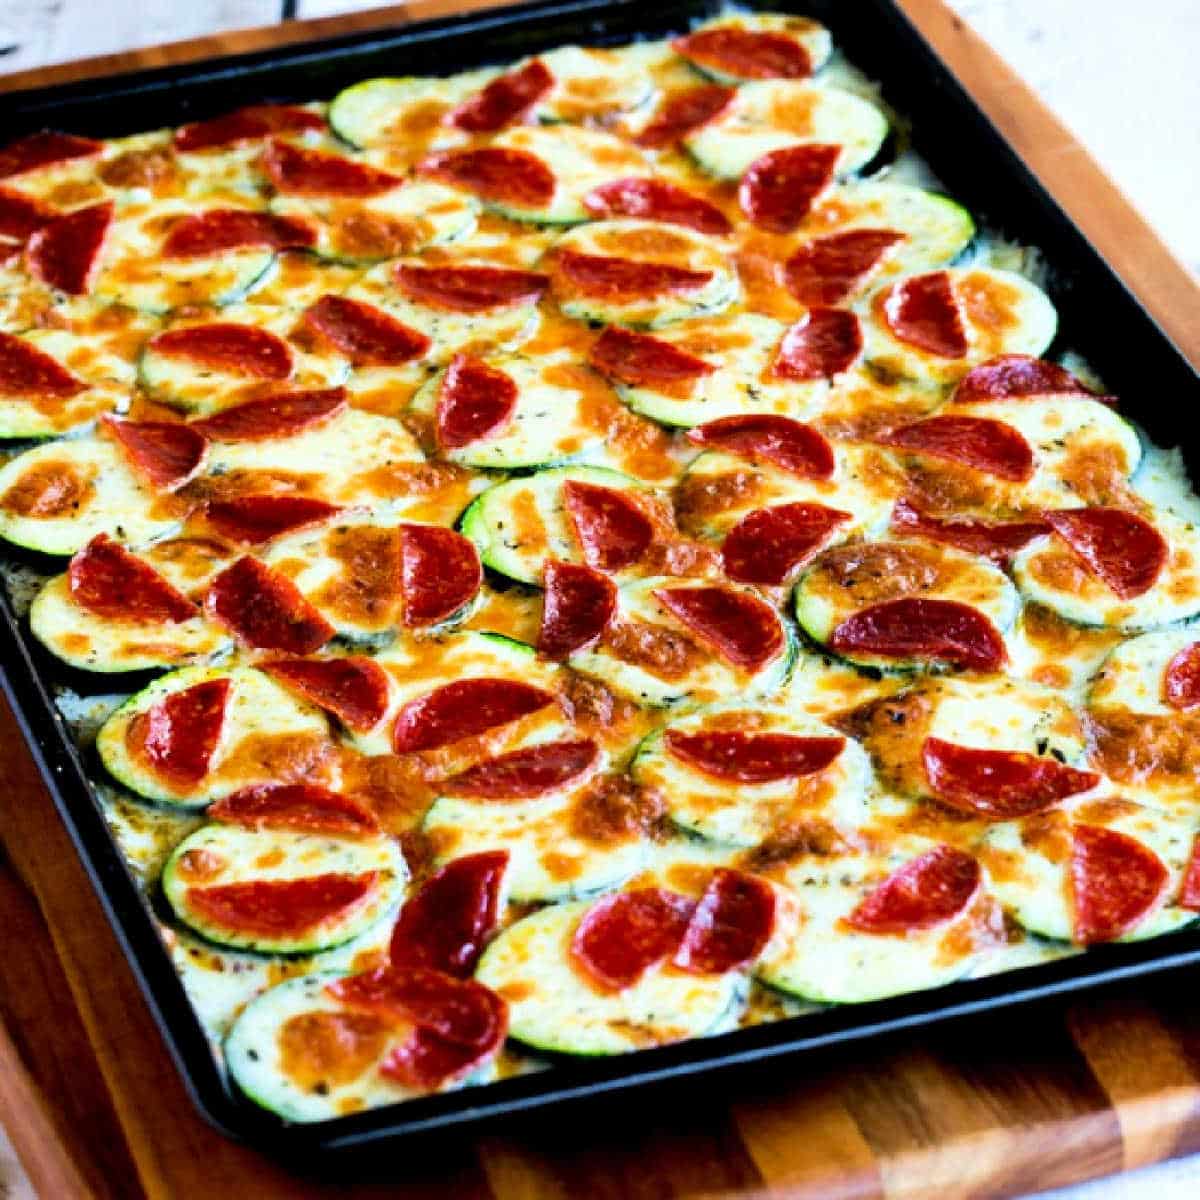 Square image of Broiled Zucchini with Mozzarella and Pepperoni shown on baking sheet.